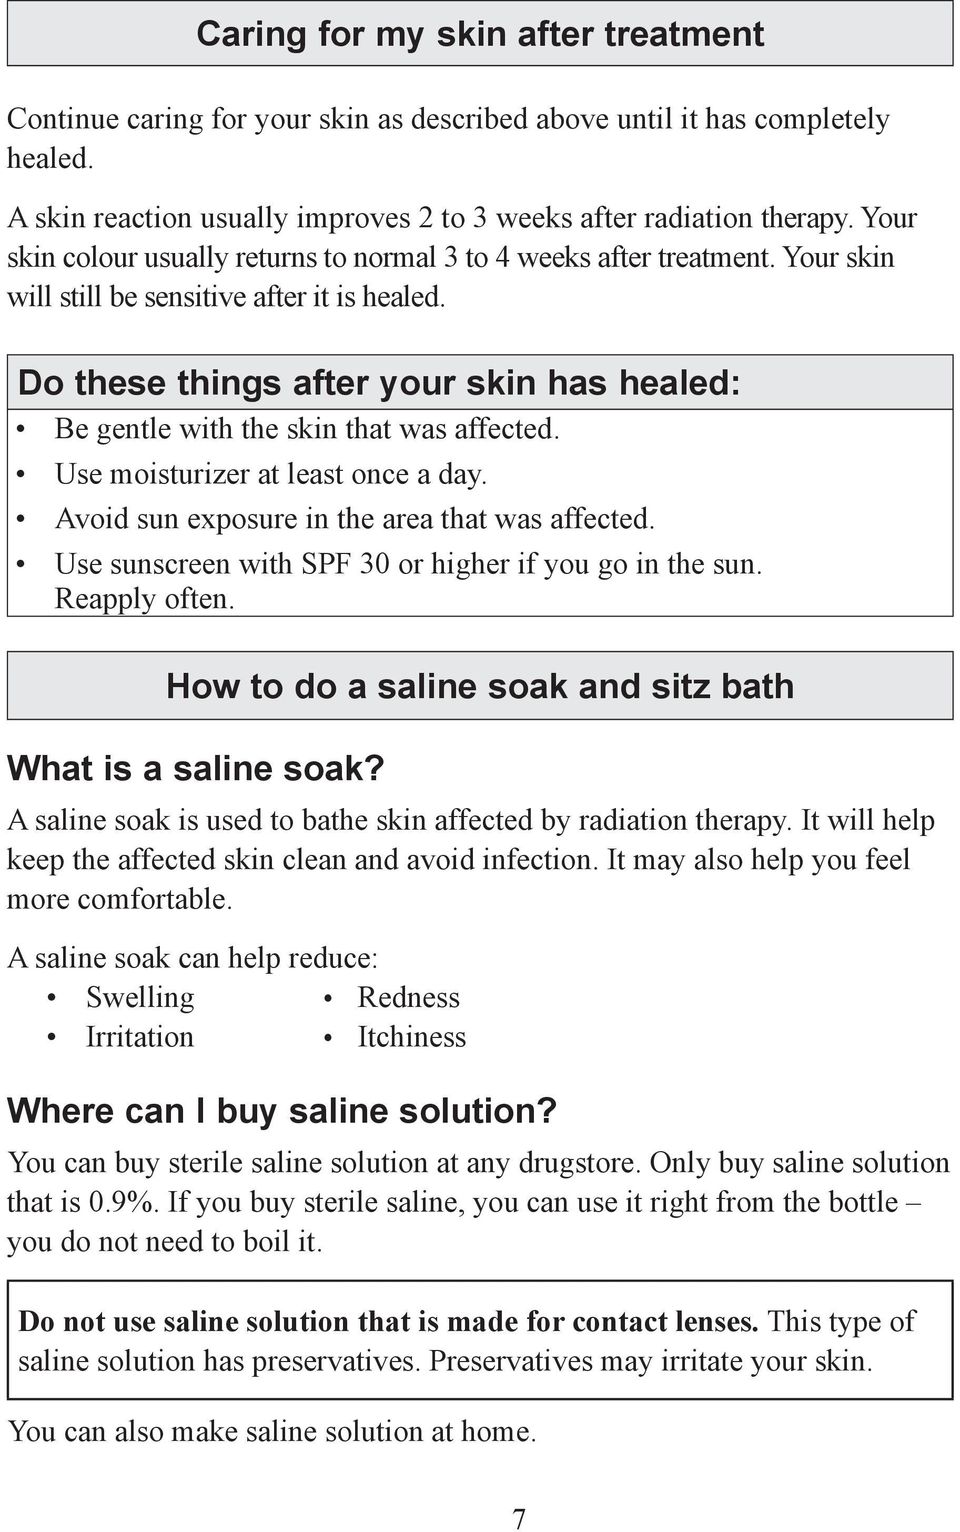 Do these things after your skin has healed: Be gentle with the skin that was affected. Use moisturizer at least once a day. Avoid sun exposure in the area that was affected.